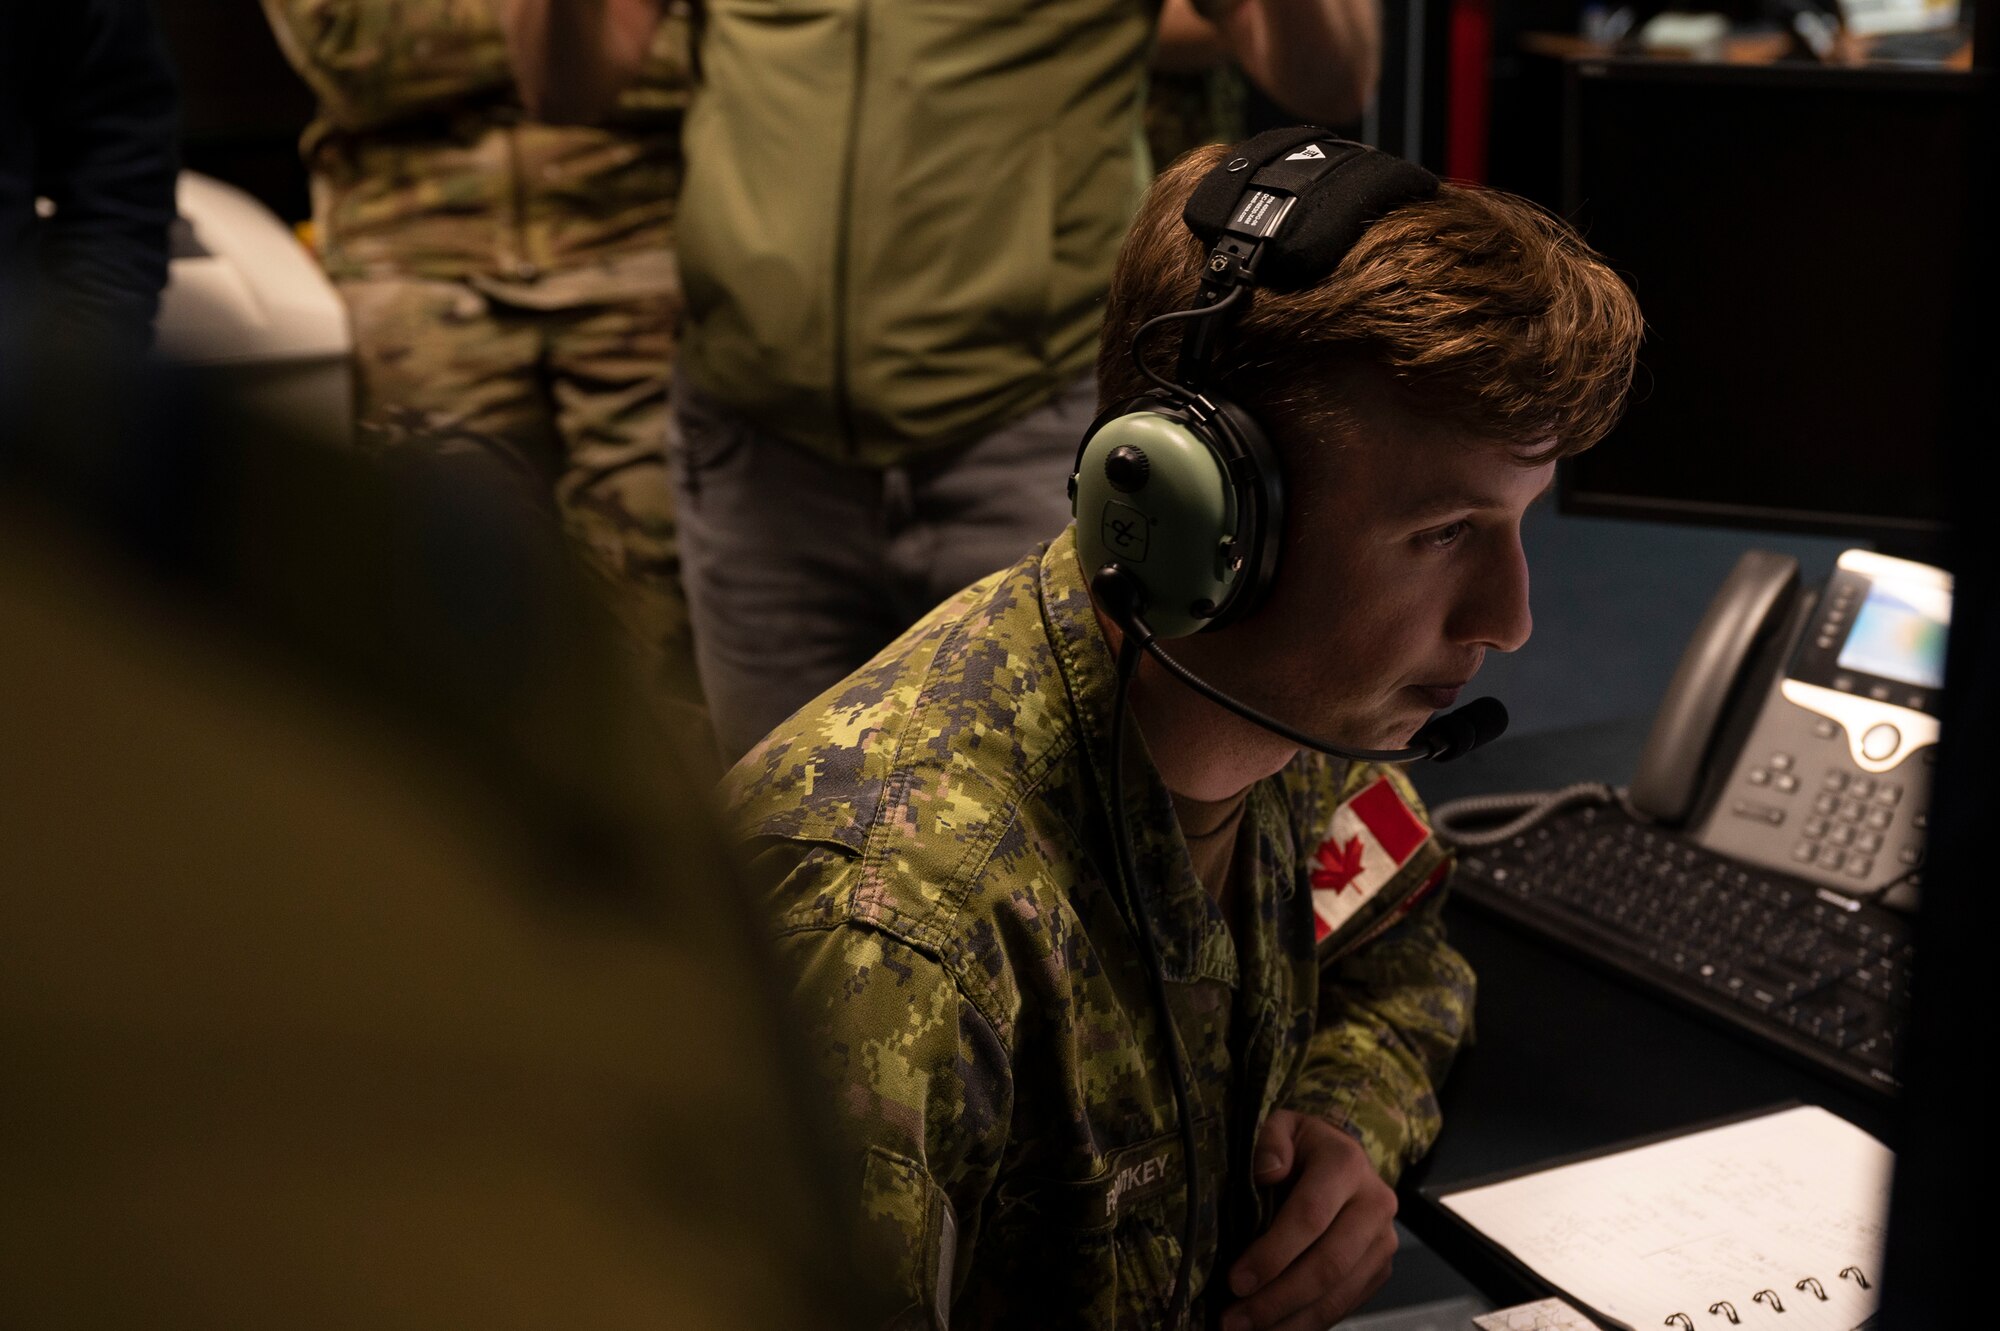 A Canadian terminal attack controller speaks into a headset during exercise Spartan Bigfoot 21 at Einsiedlerhof Air Station